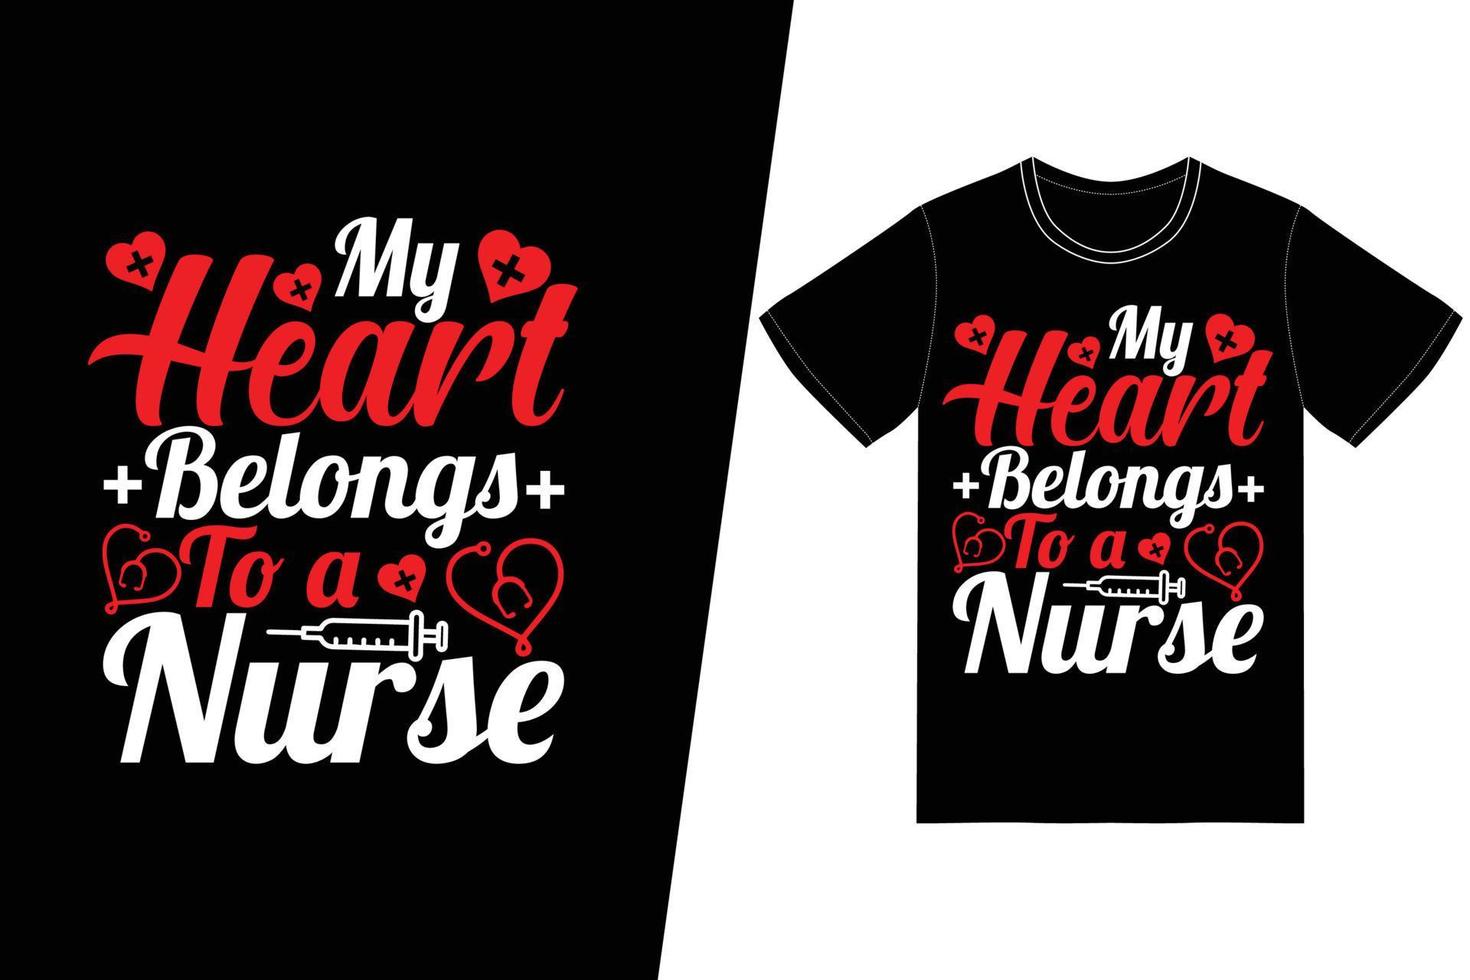 My heart belongs to a nurse Nurse day design. Nurse t-shirt design vector. For t-shirt print and other uses. vector